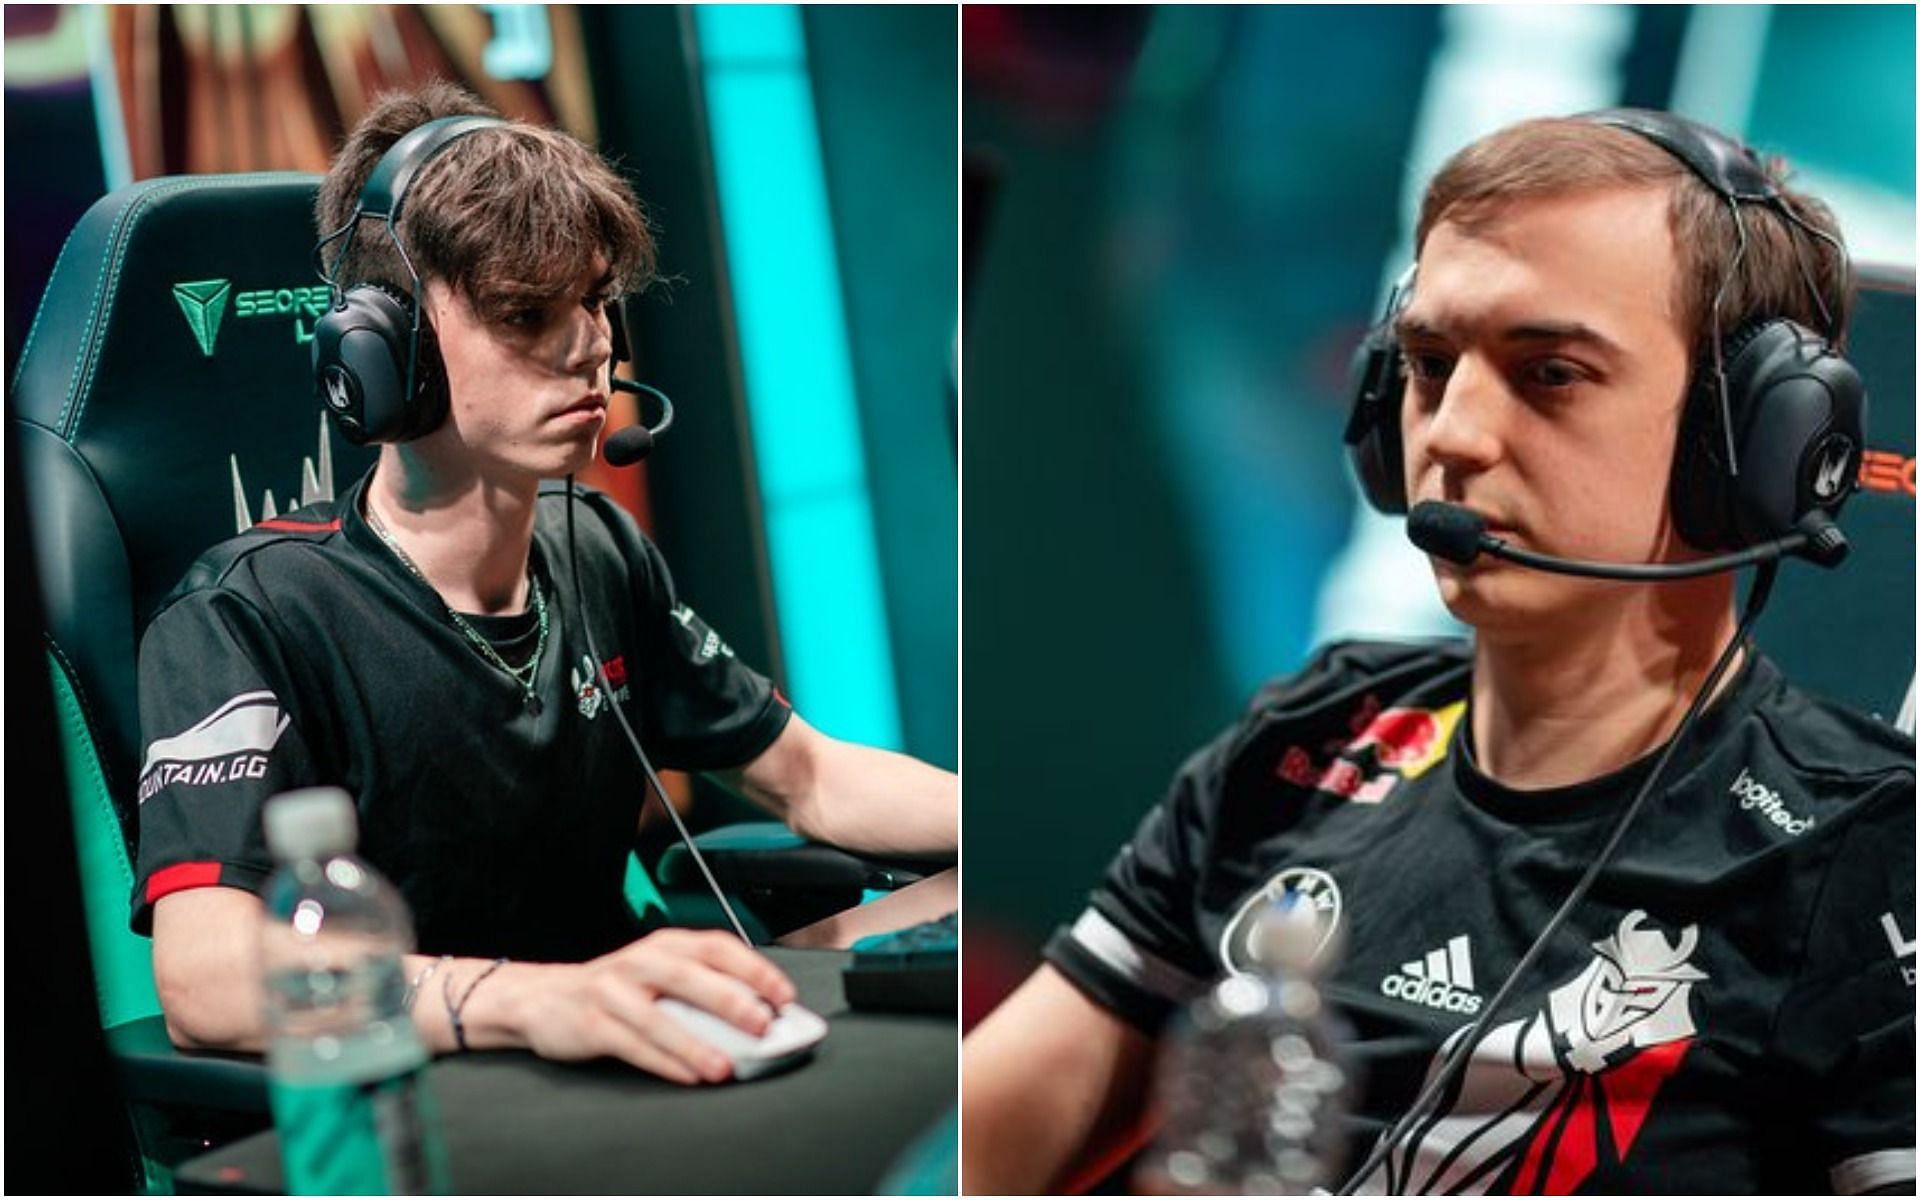 Vetheo and Caps will be locking horns when G2 Esports and Misfits Gaming clash against each other at the League of Legends LEC 2022 playoffs (Image via Riot Games)